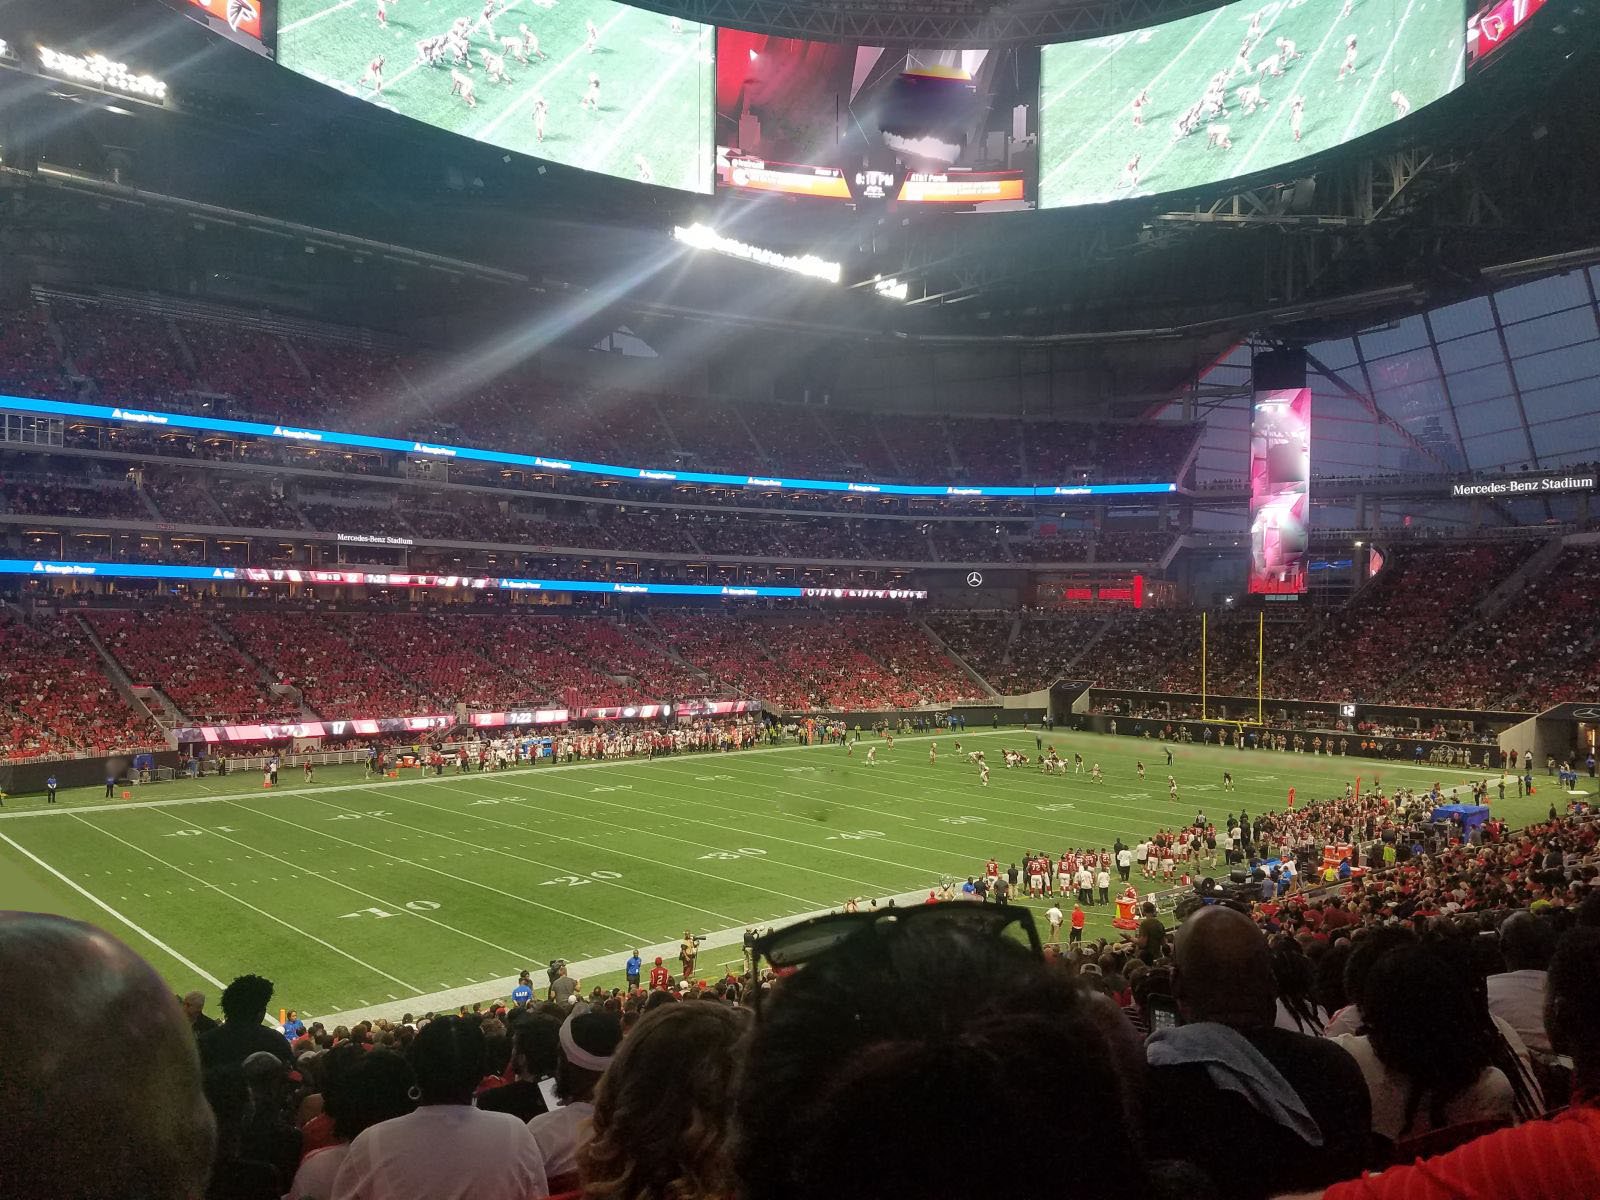 section 114, row 37 seat view  for football - mercedes-benz stadium